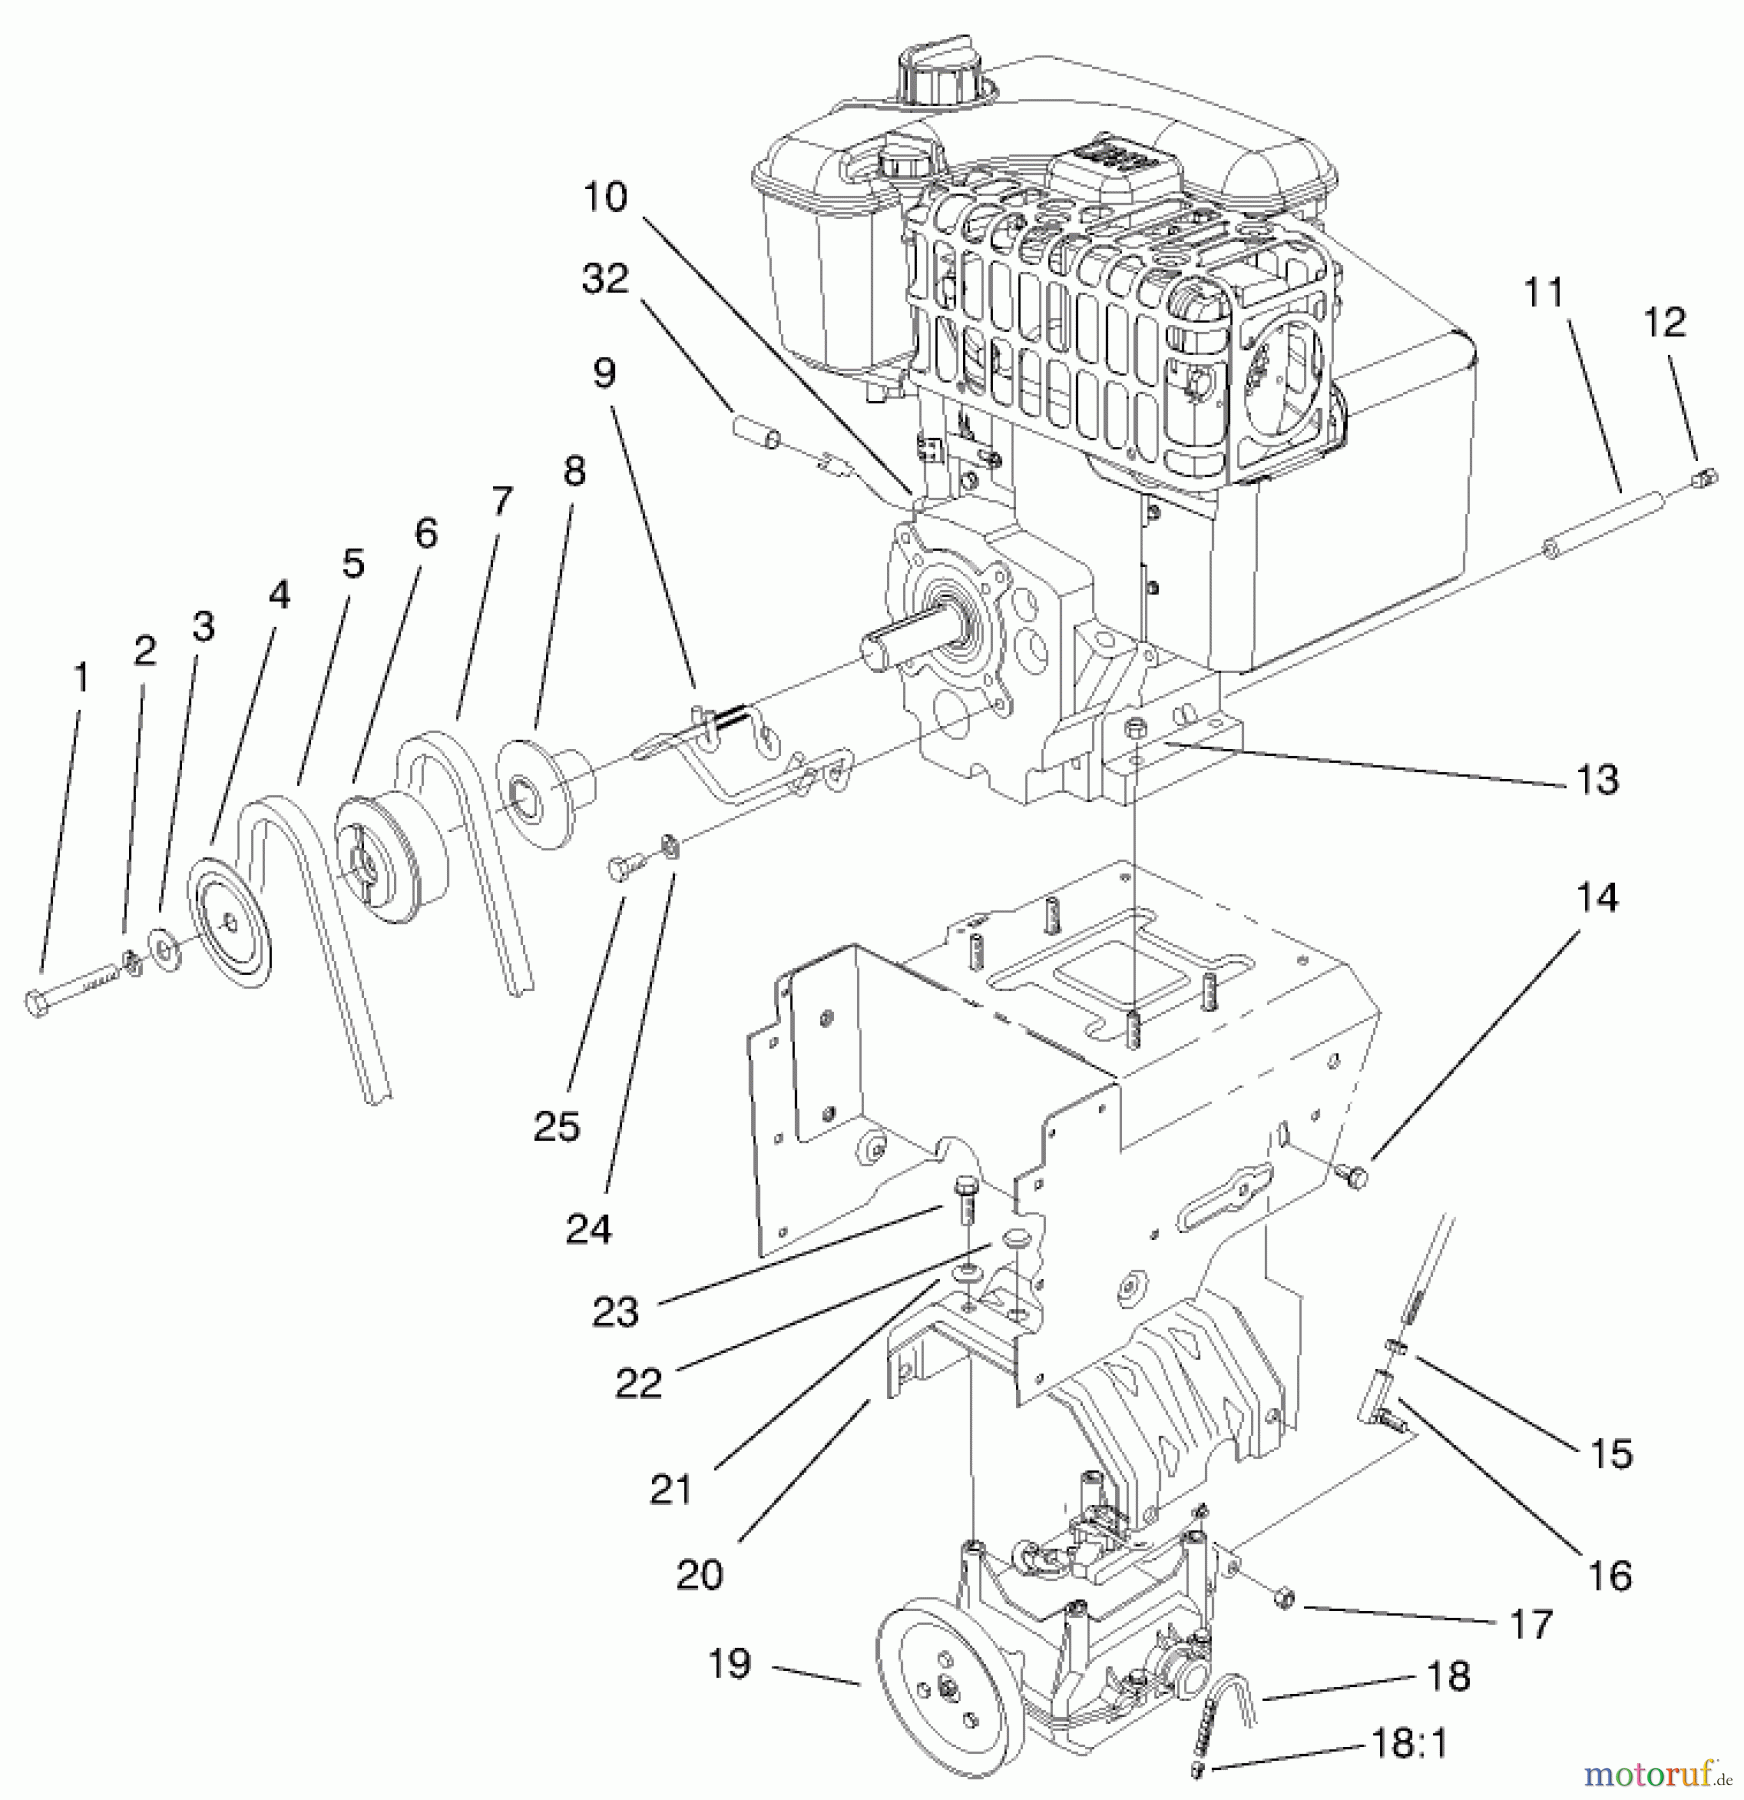  Toro Neu Snow Blowers/Snow Throwers Seite 1 38559 (1028) - Toro 1028 Power Shift Snowthrower, 2000 (200000001-200999999) ENGINE AND TRANSMISSION ASSEMBLY